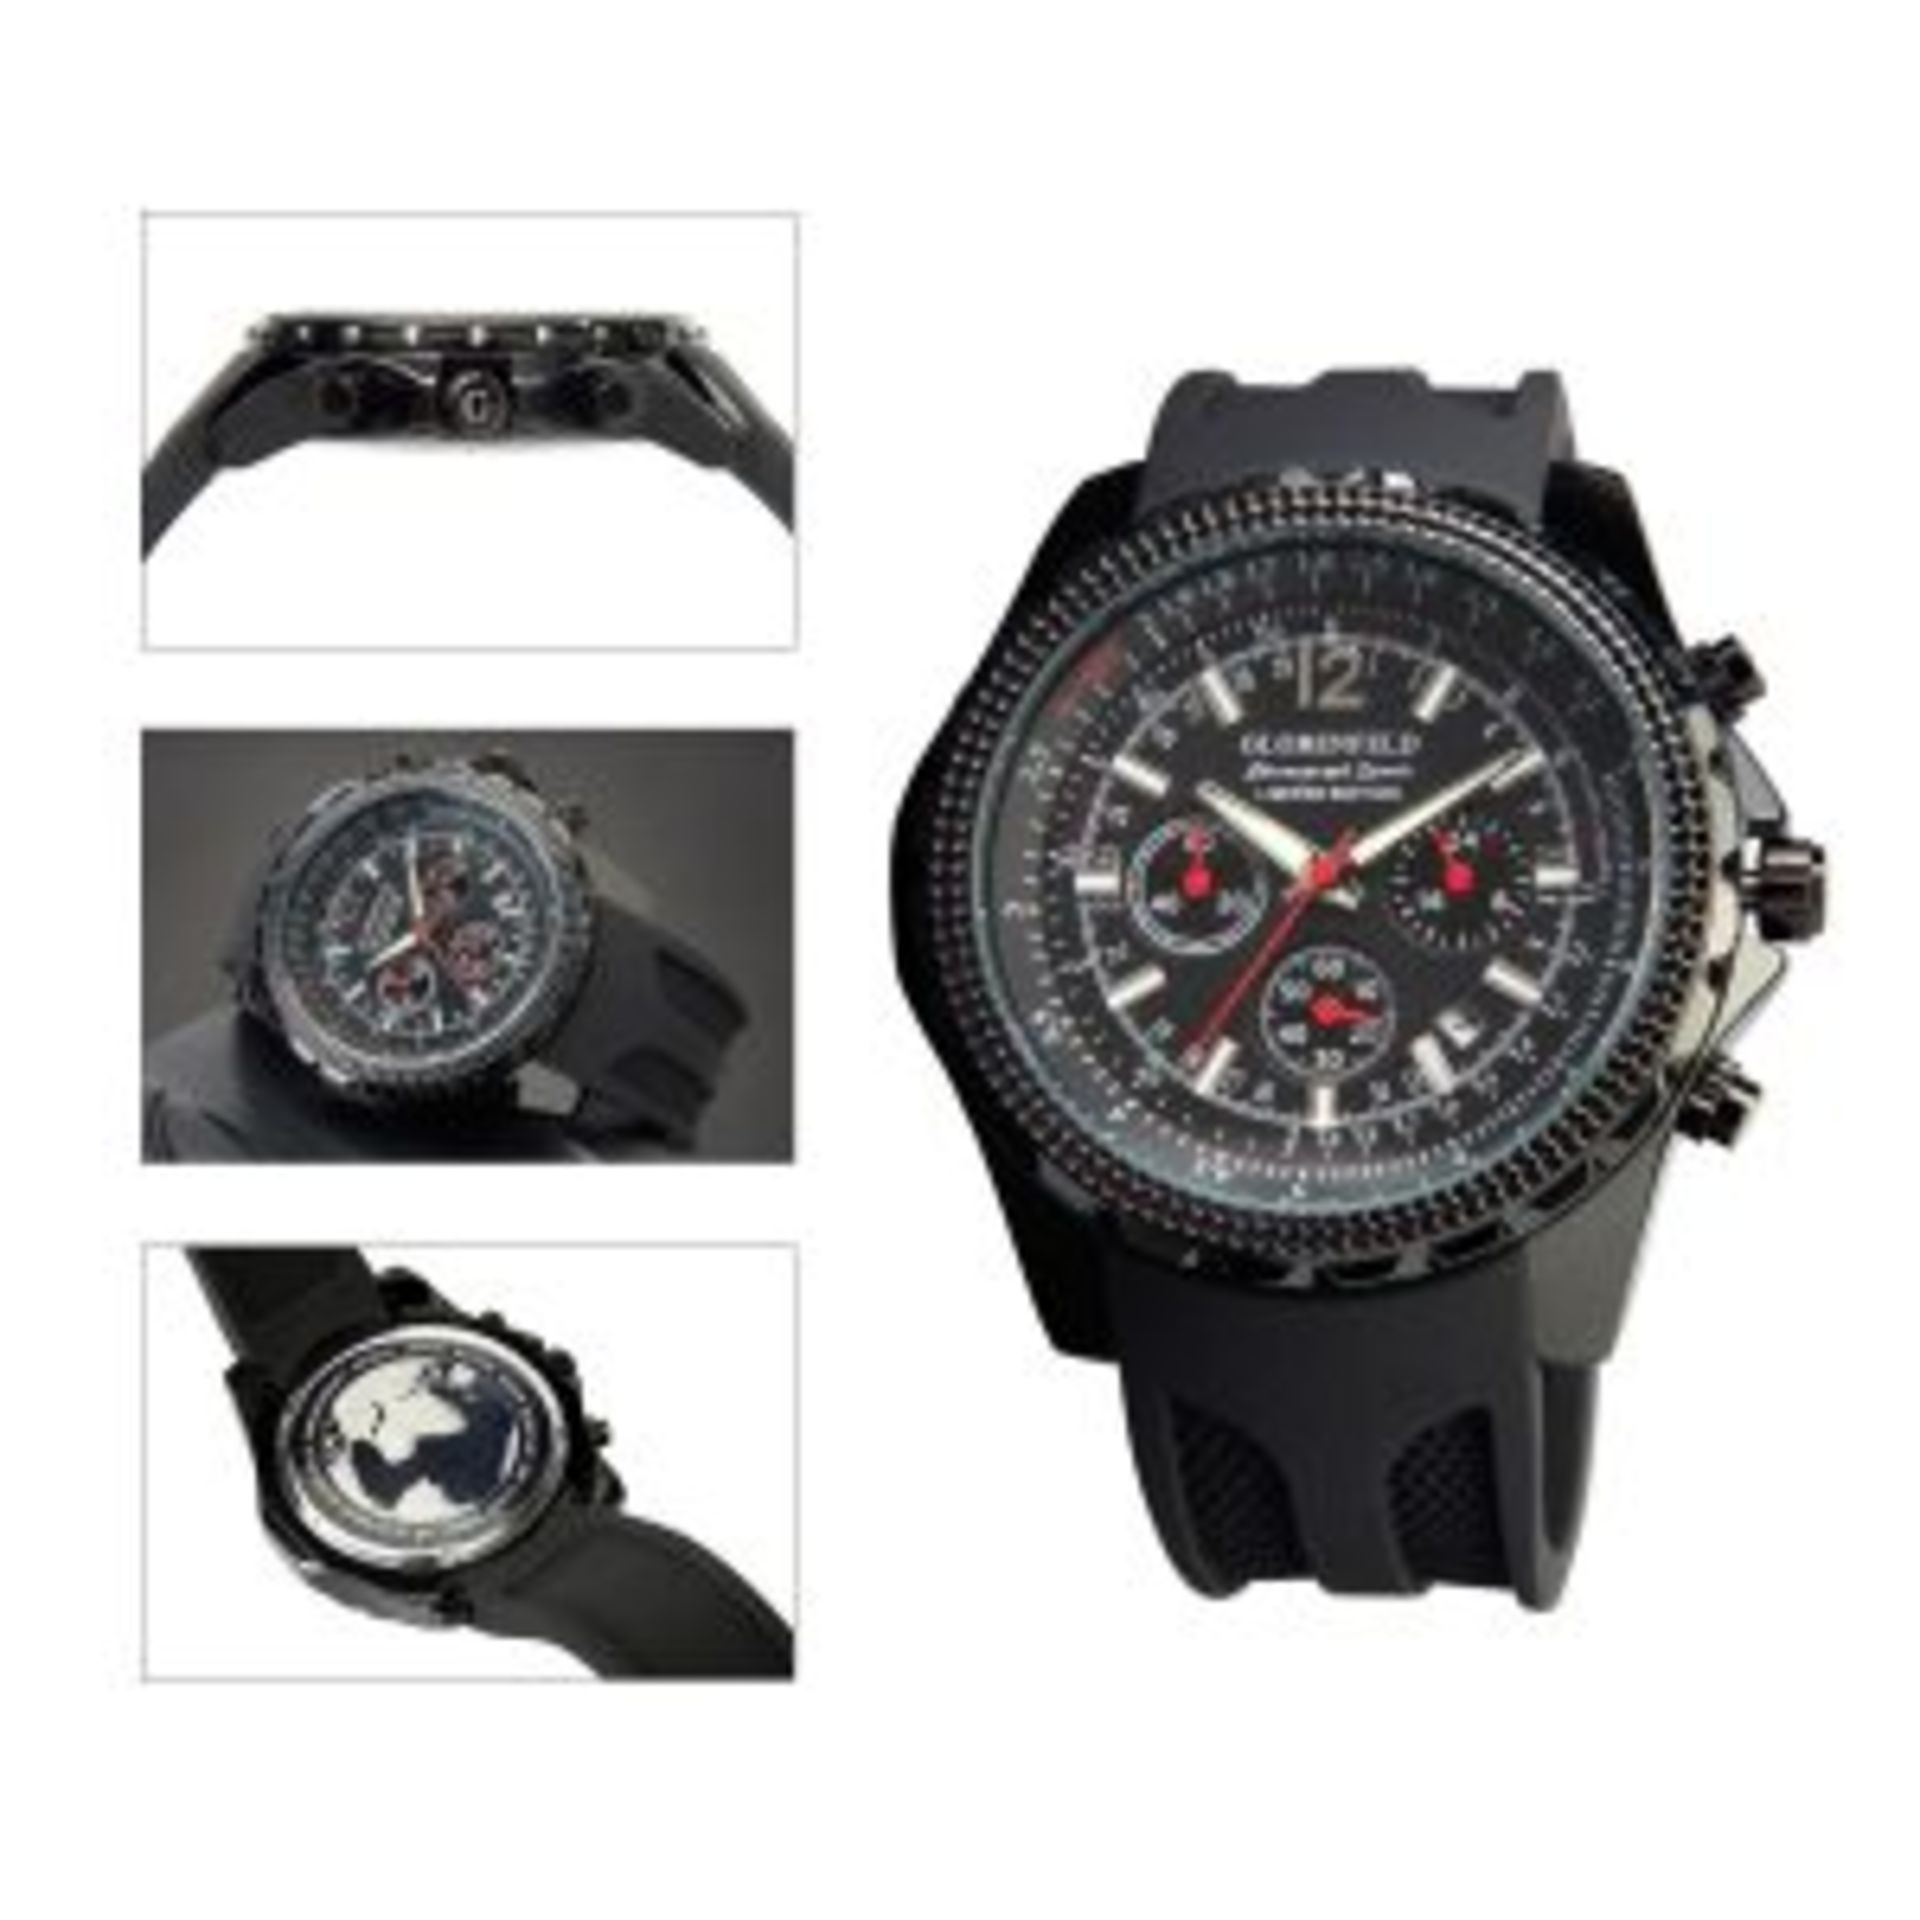 V Brand New Gents Globenfeld Limited Edition Chronograph Sports Watch with Full Chronograph